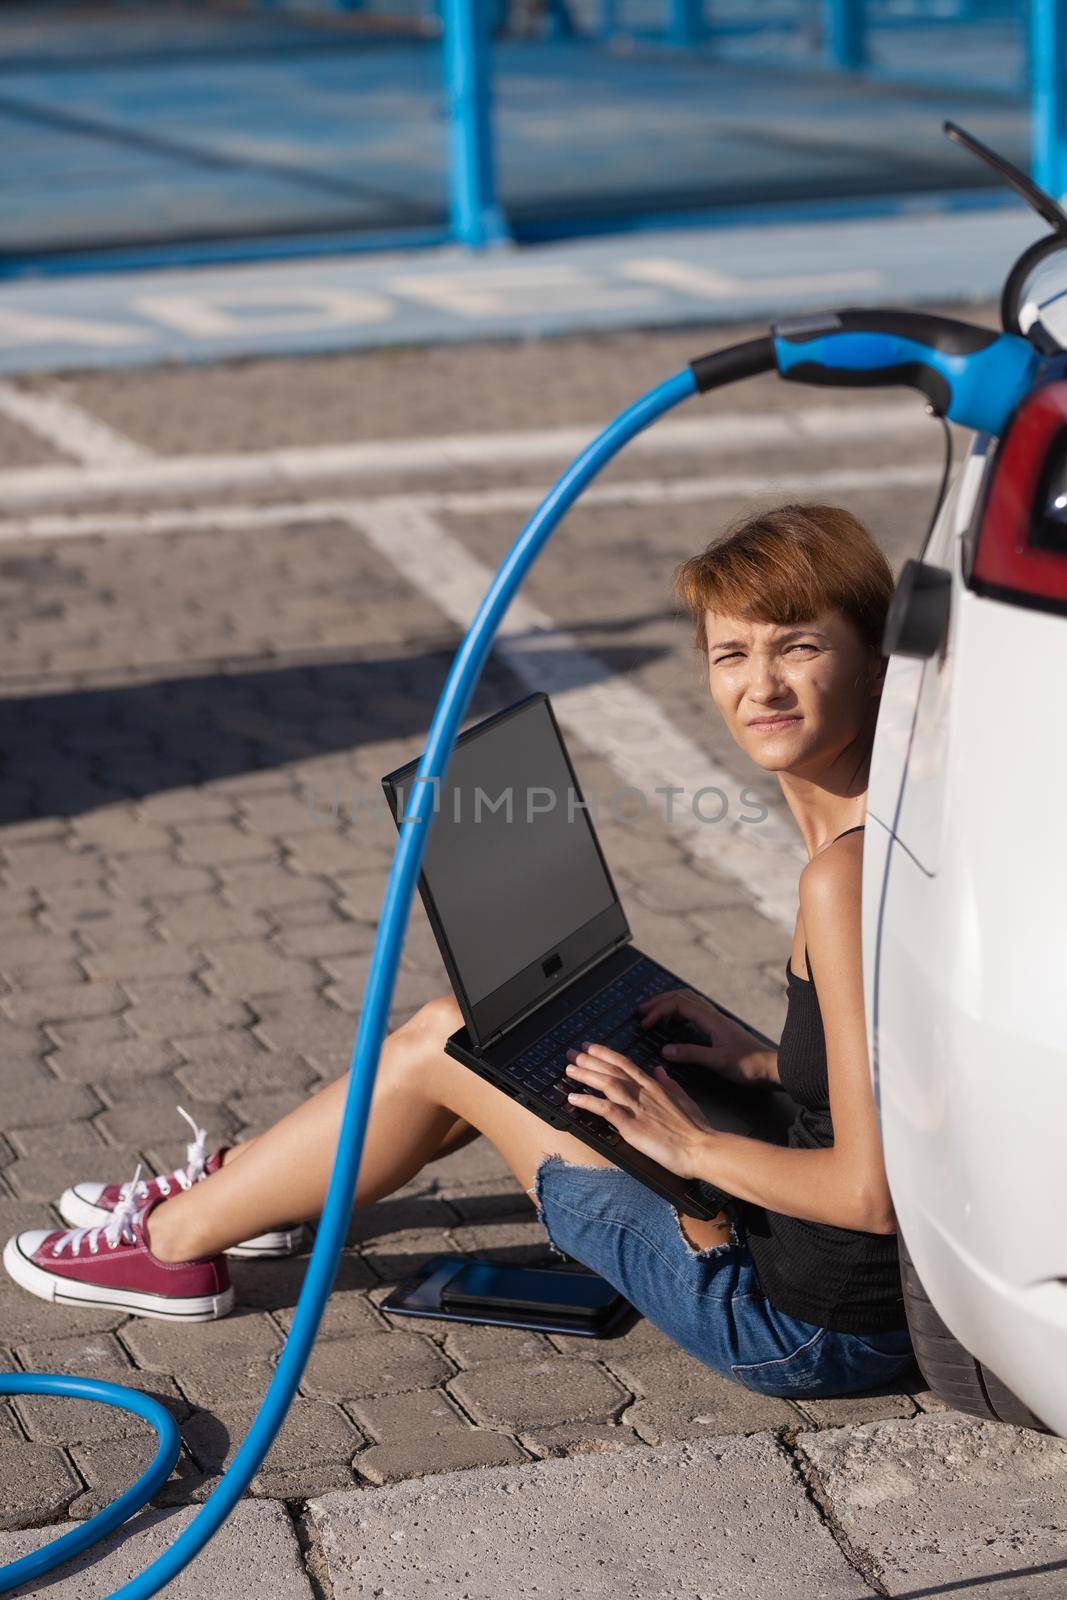 Girl waiting on the ground while her electric car is charging. Working on a laptop computer by kokimk